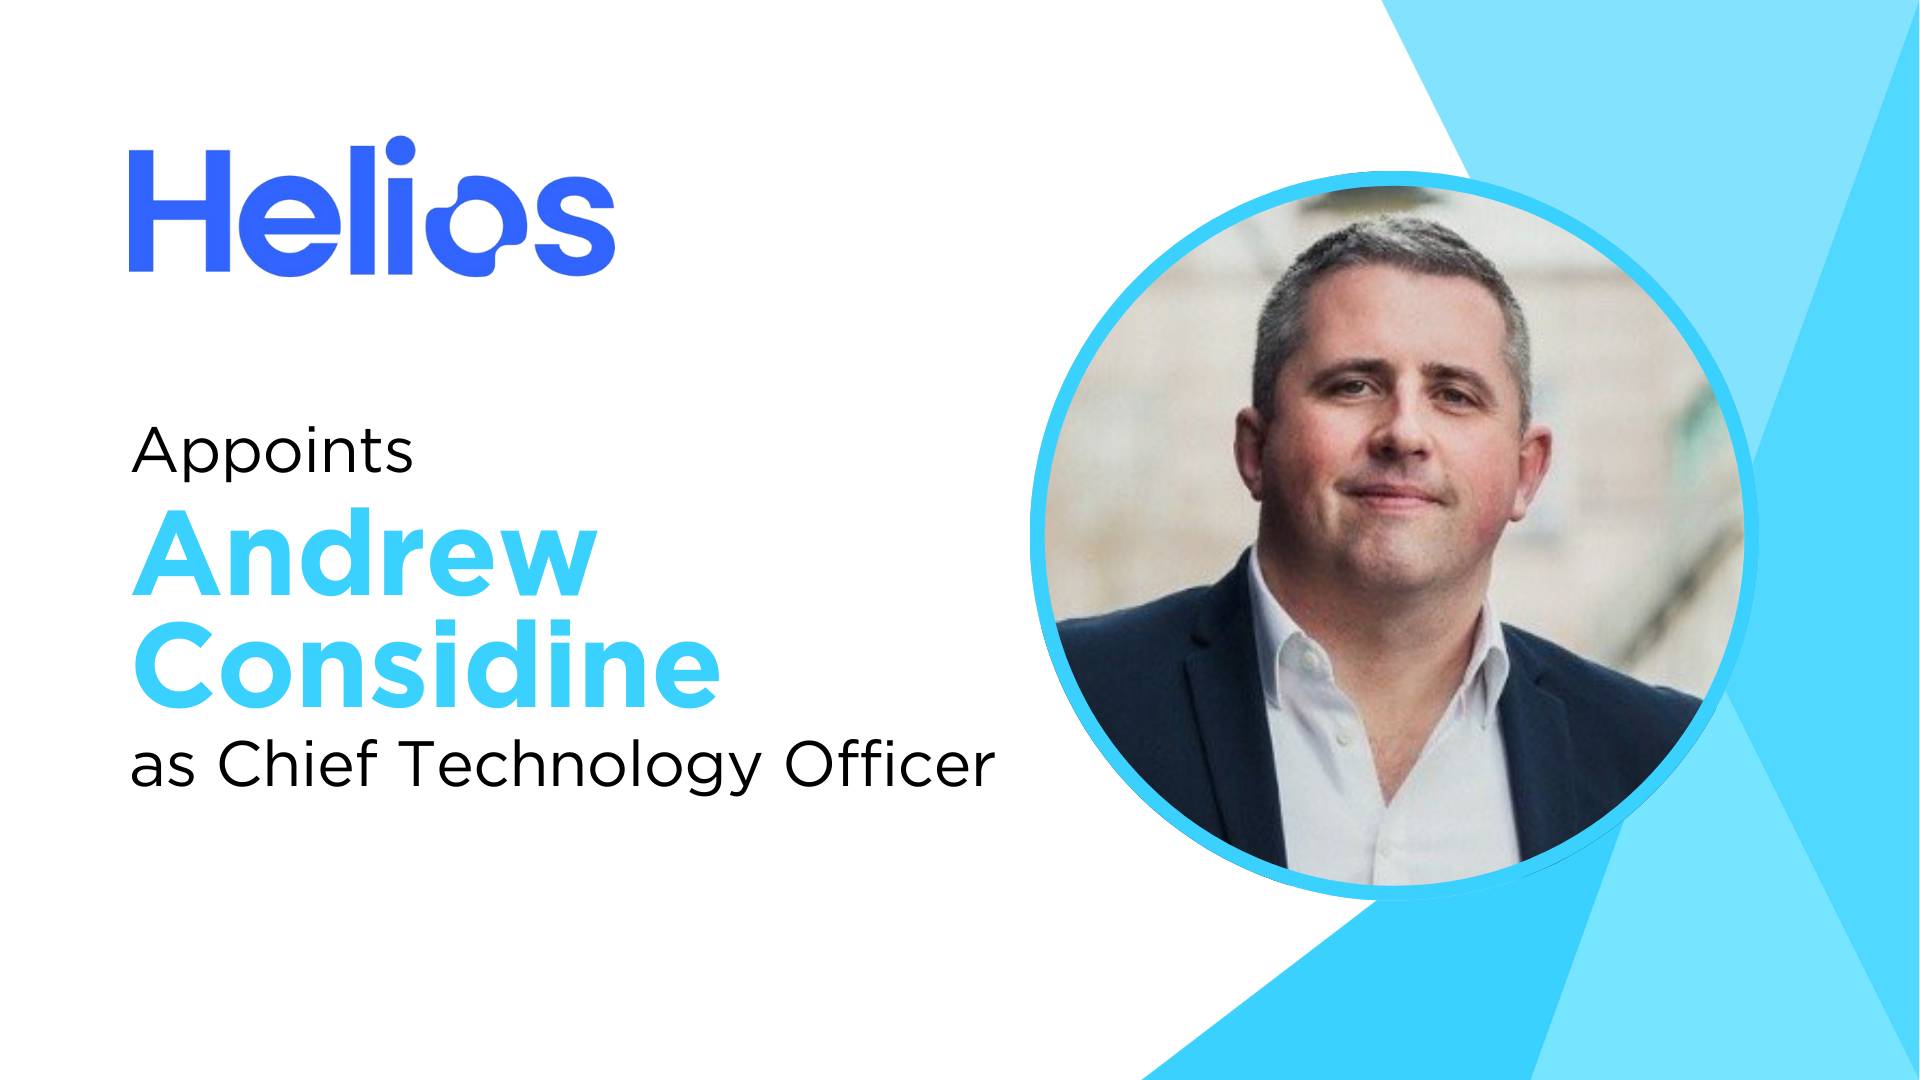 Helios Appoints Andrew Considine as Chief Technology Officer to Lead Global HCM and Payments Platform